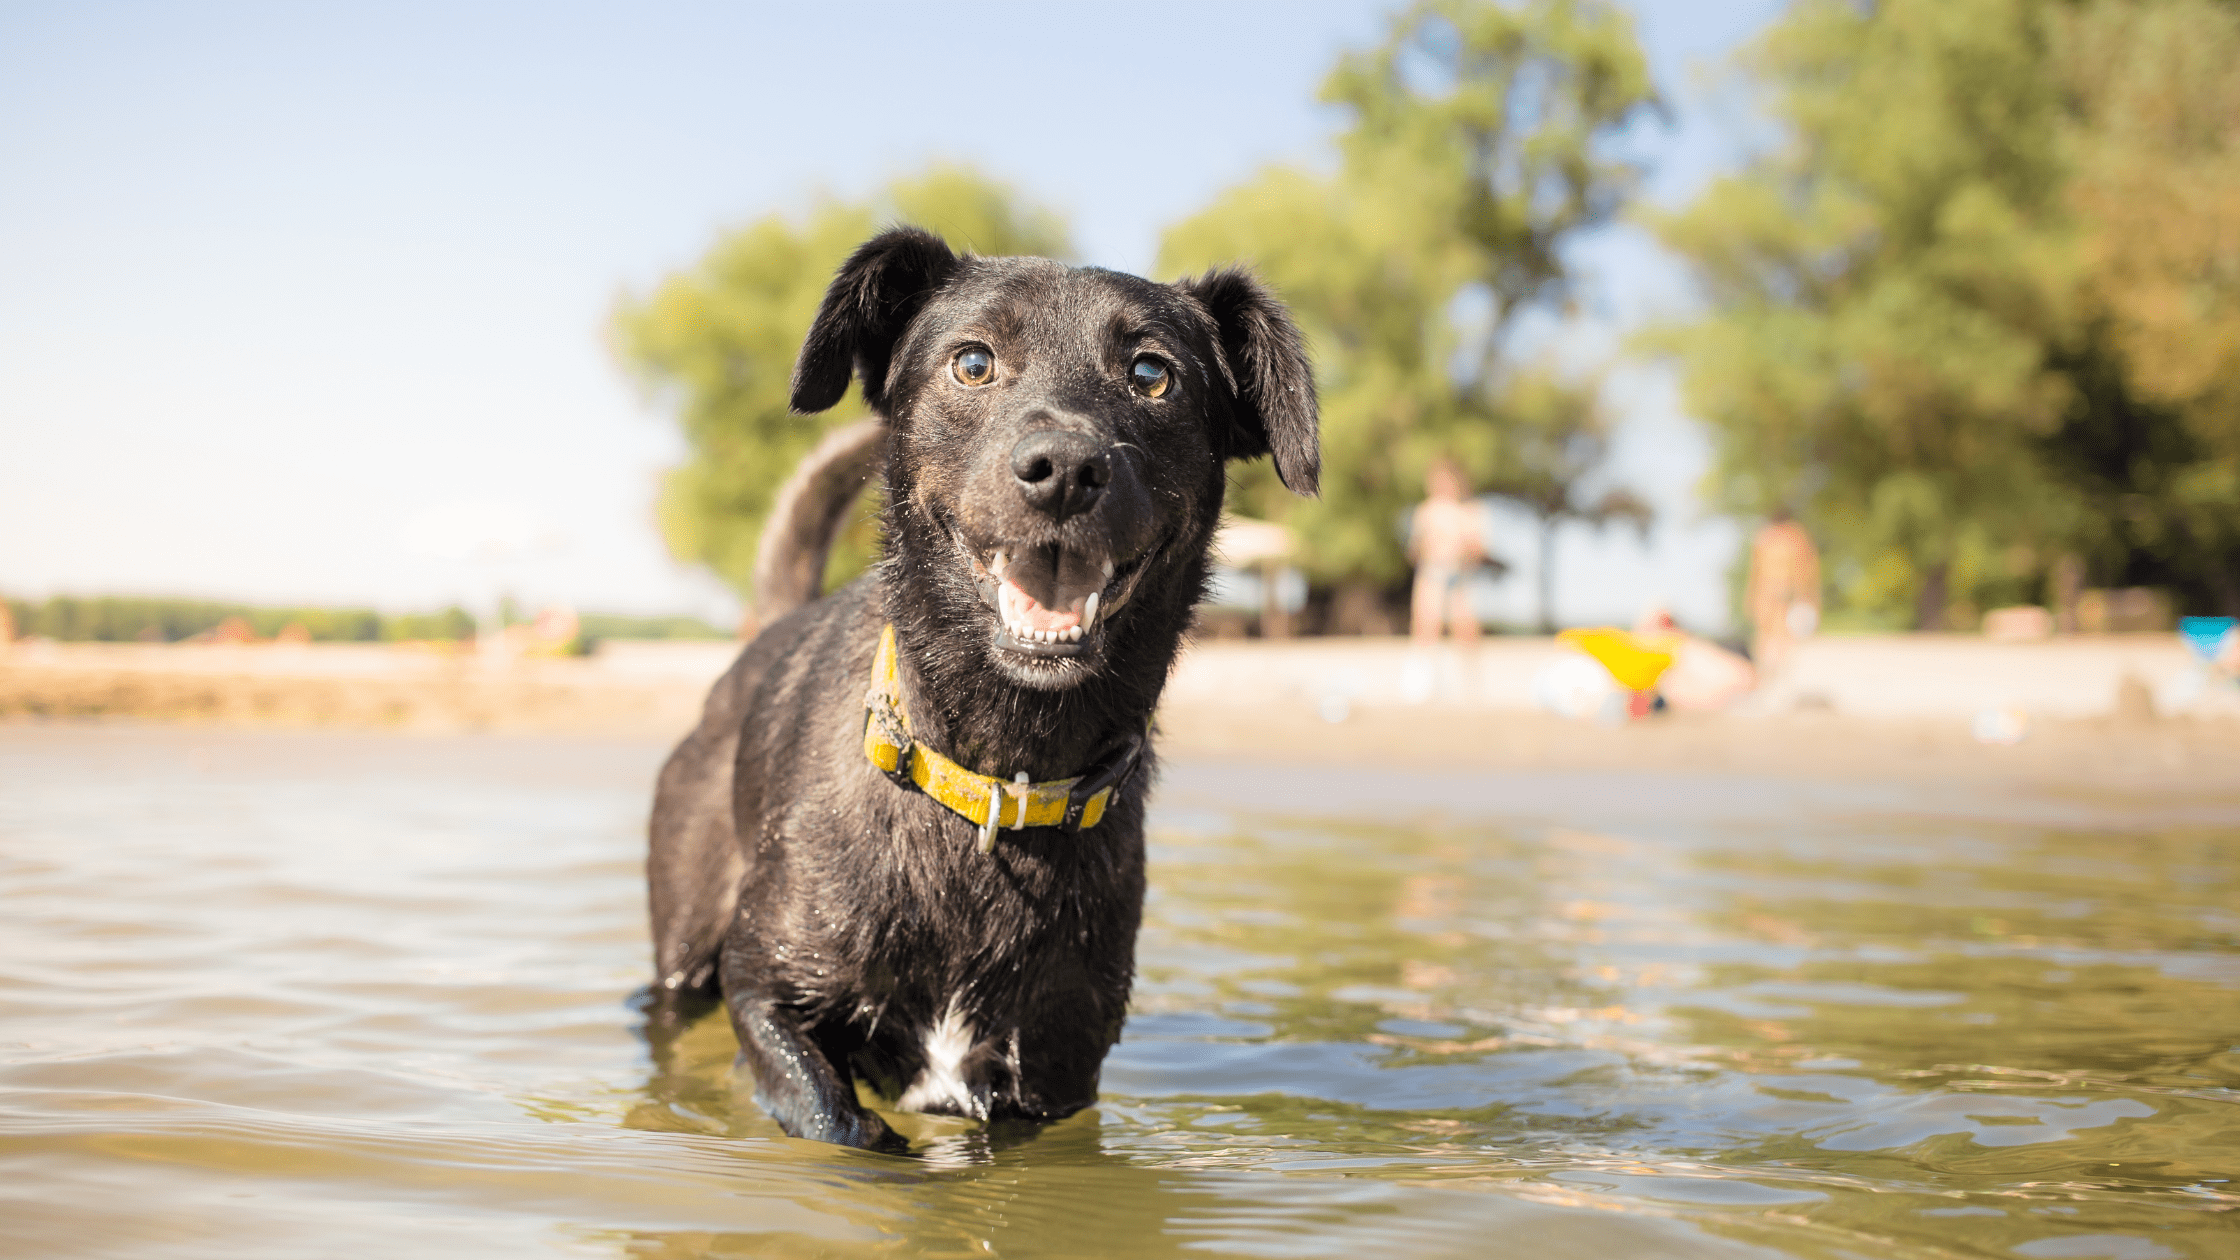 How do you keep a dog cool in a heatwave?